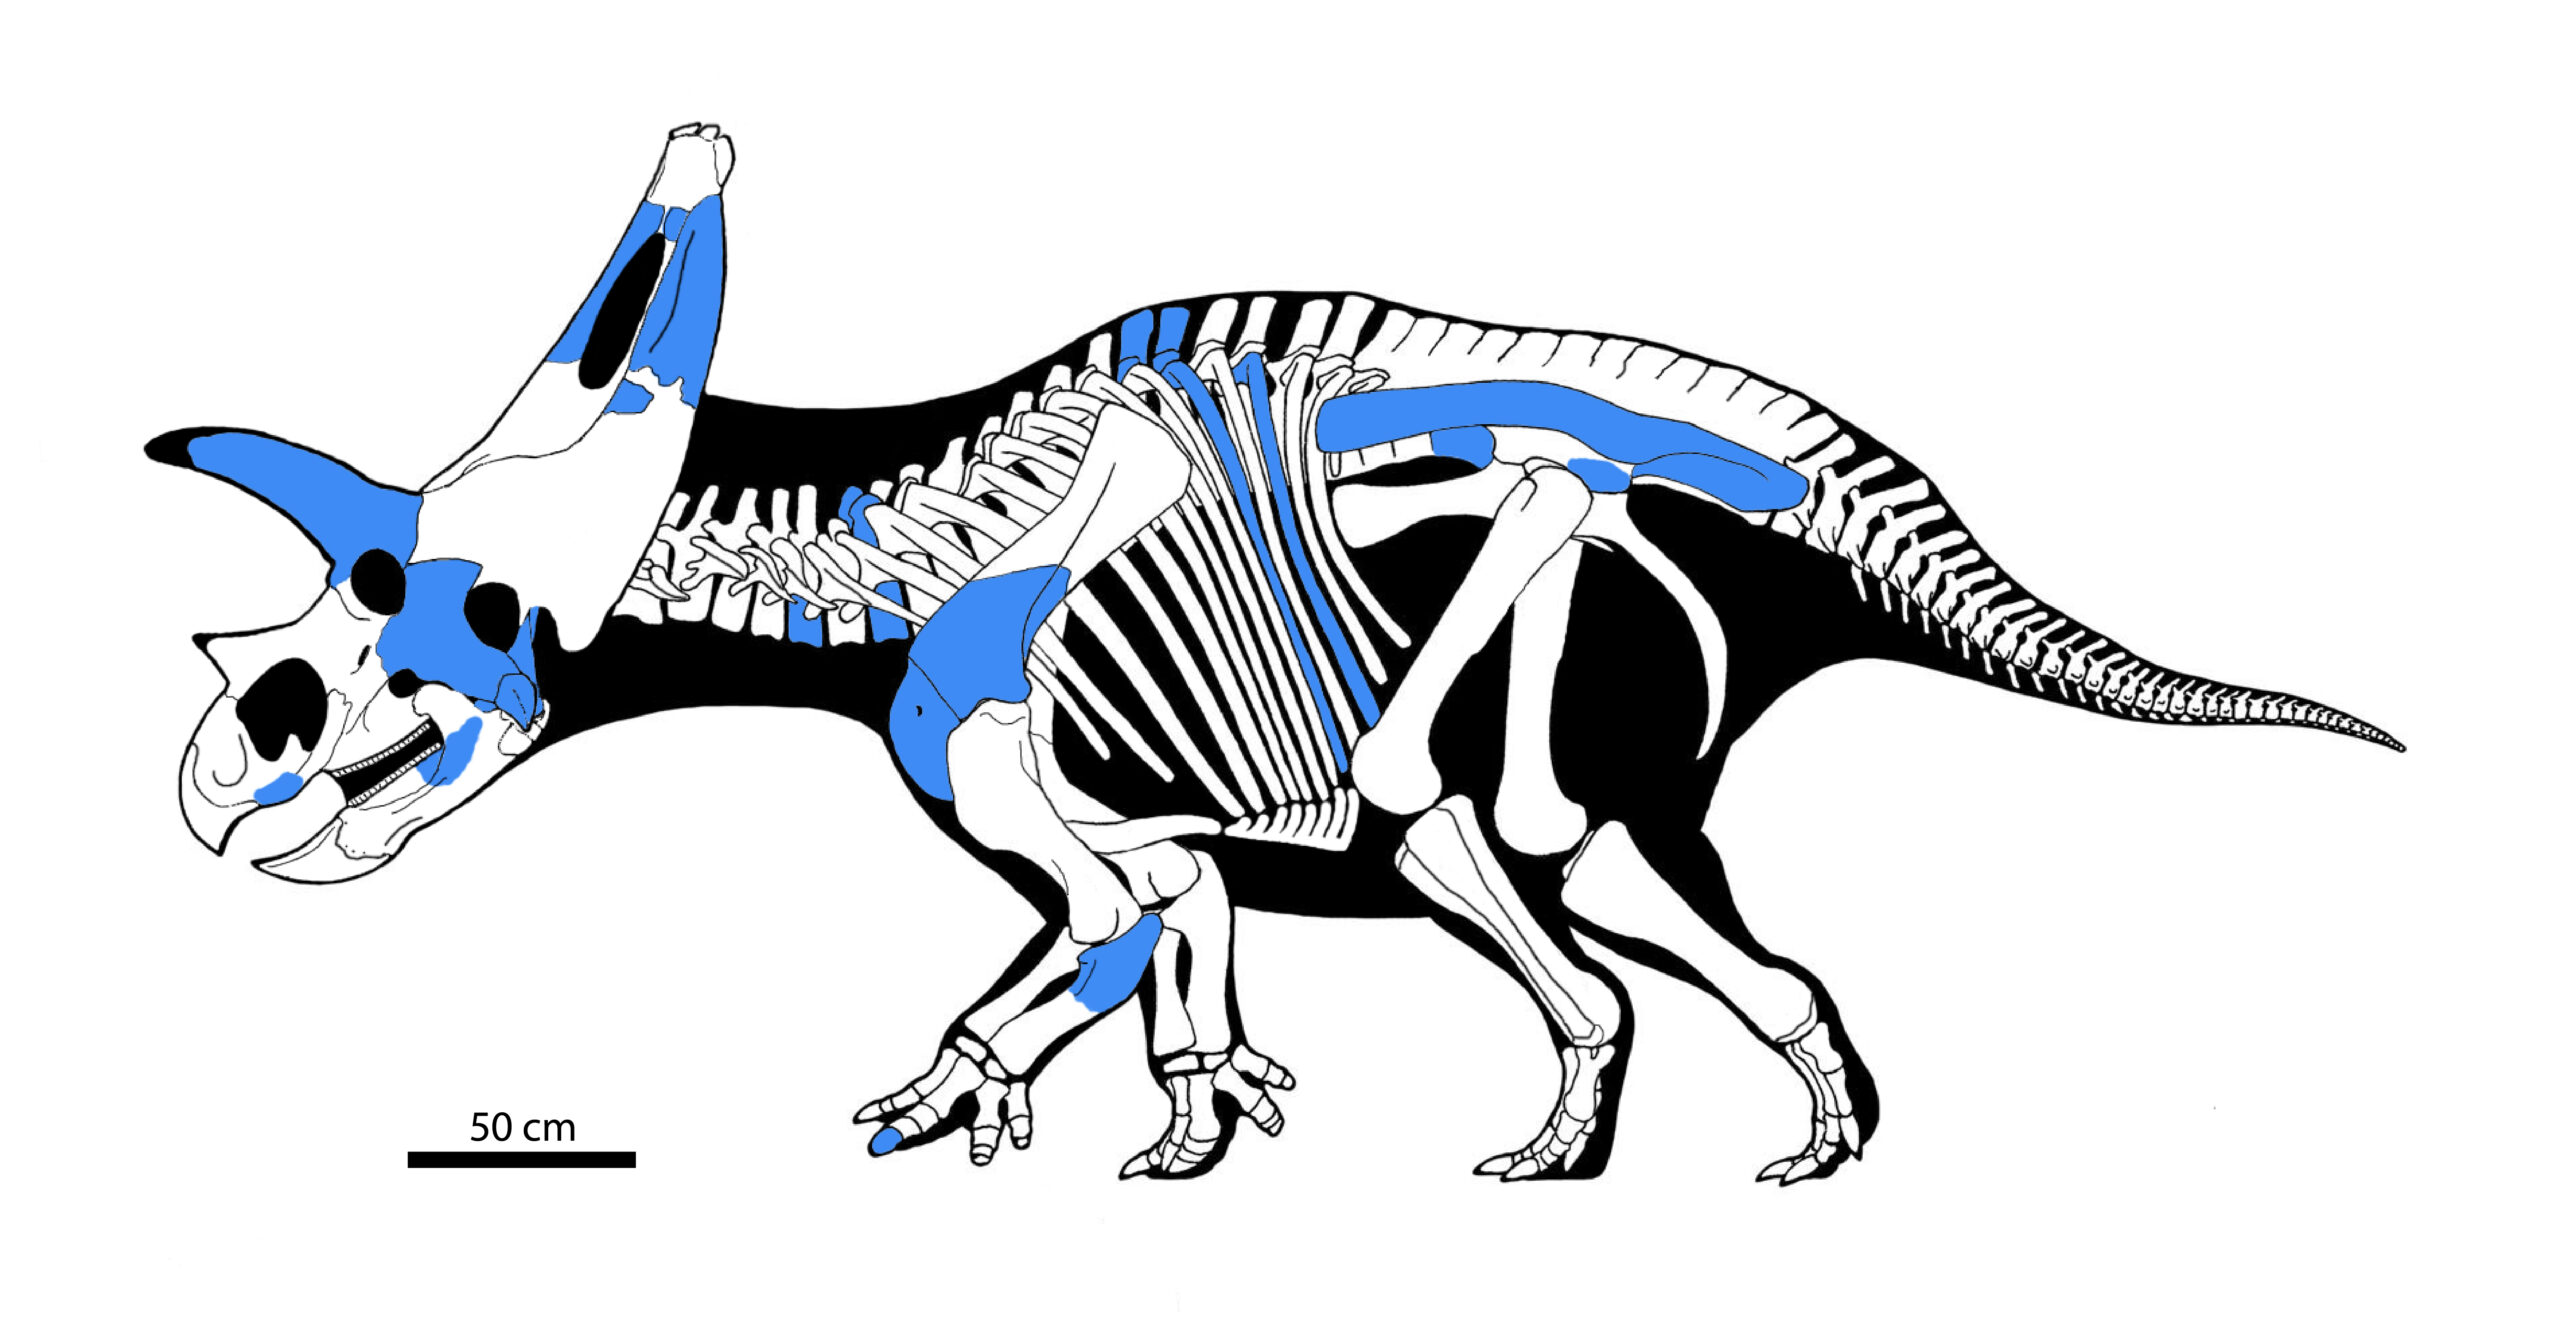 Sierraceratops turneri recovered elements